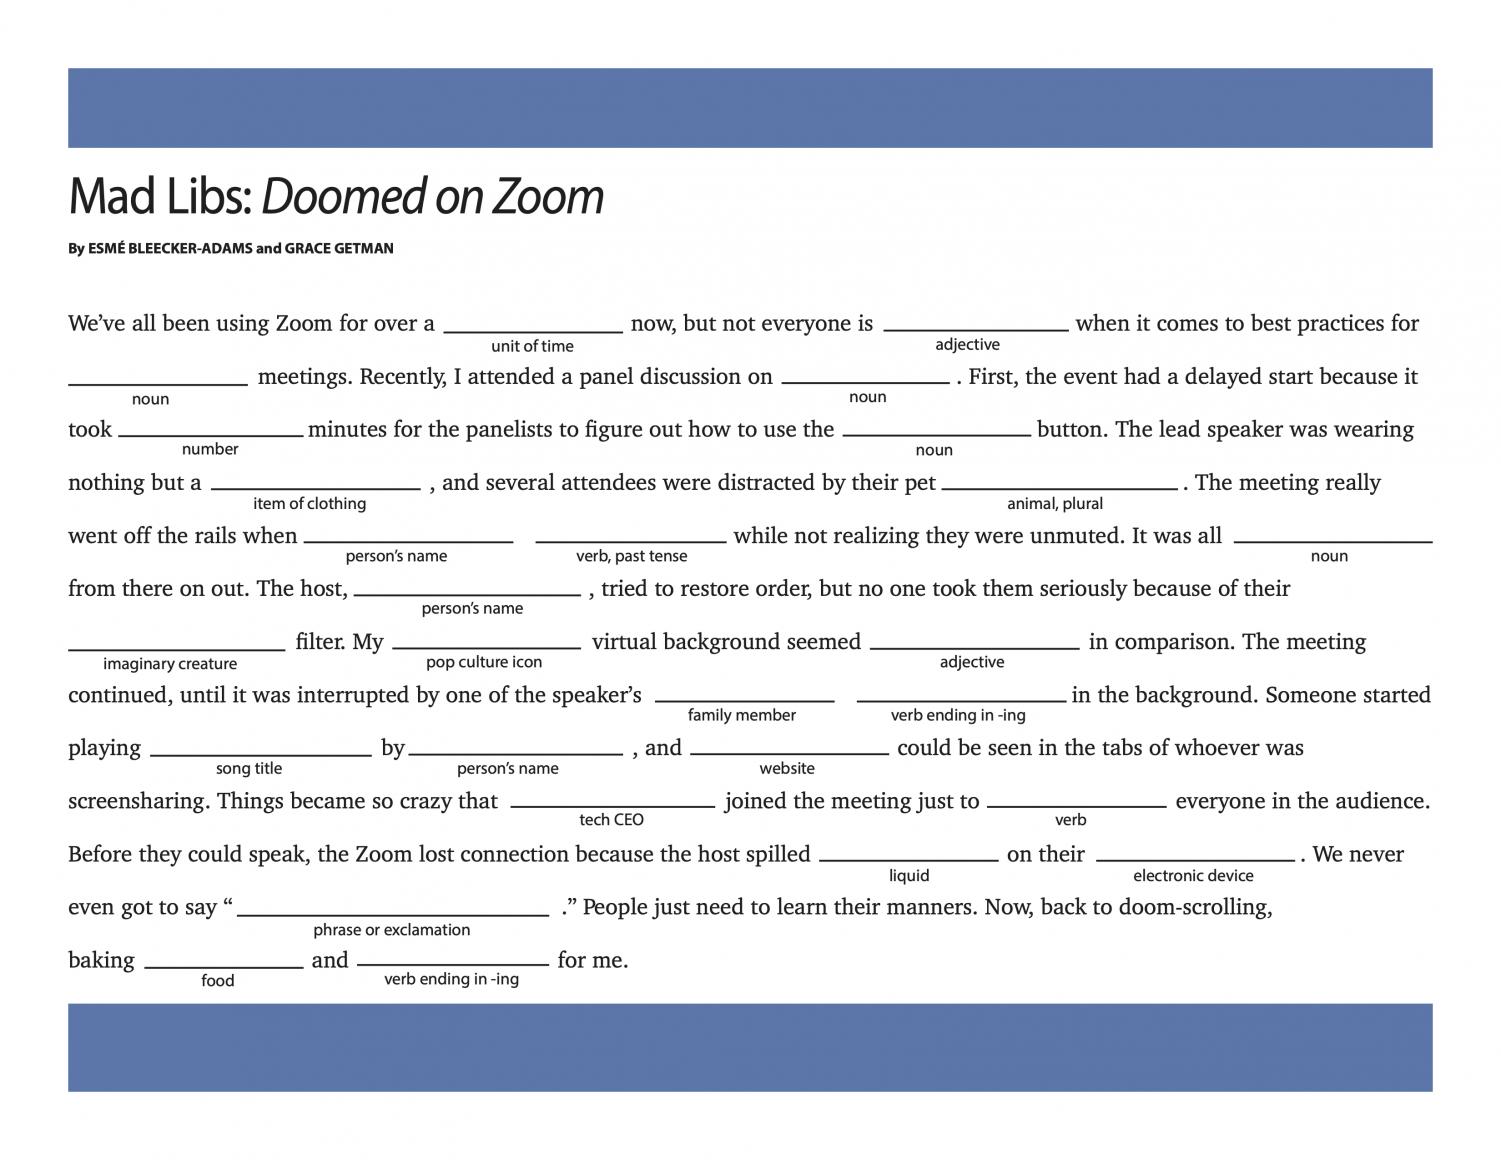 blank mad libs puzzle with blue border